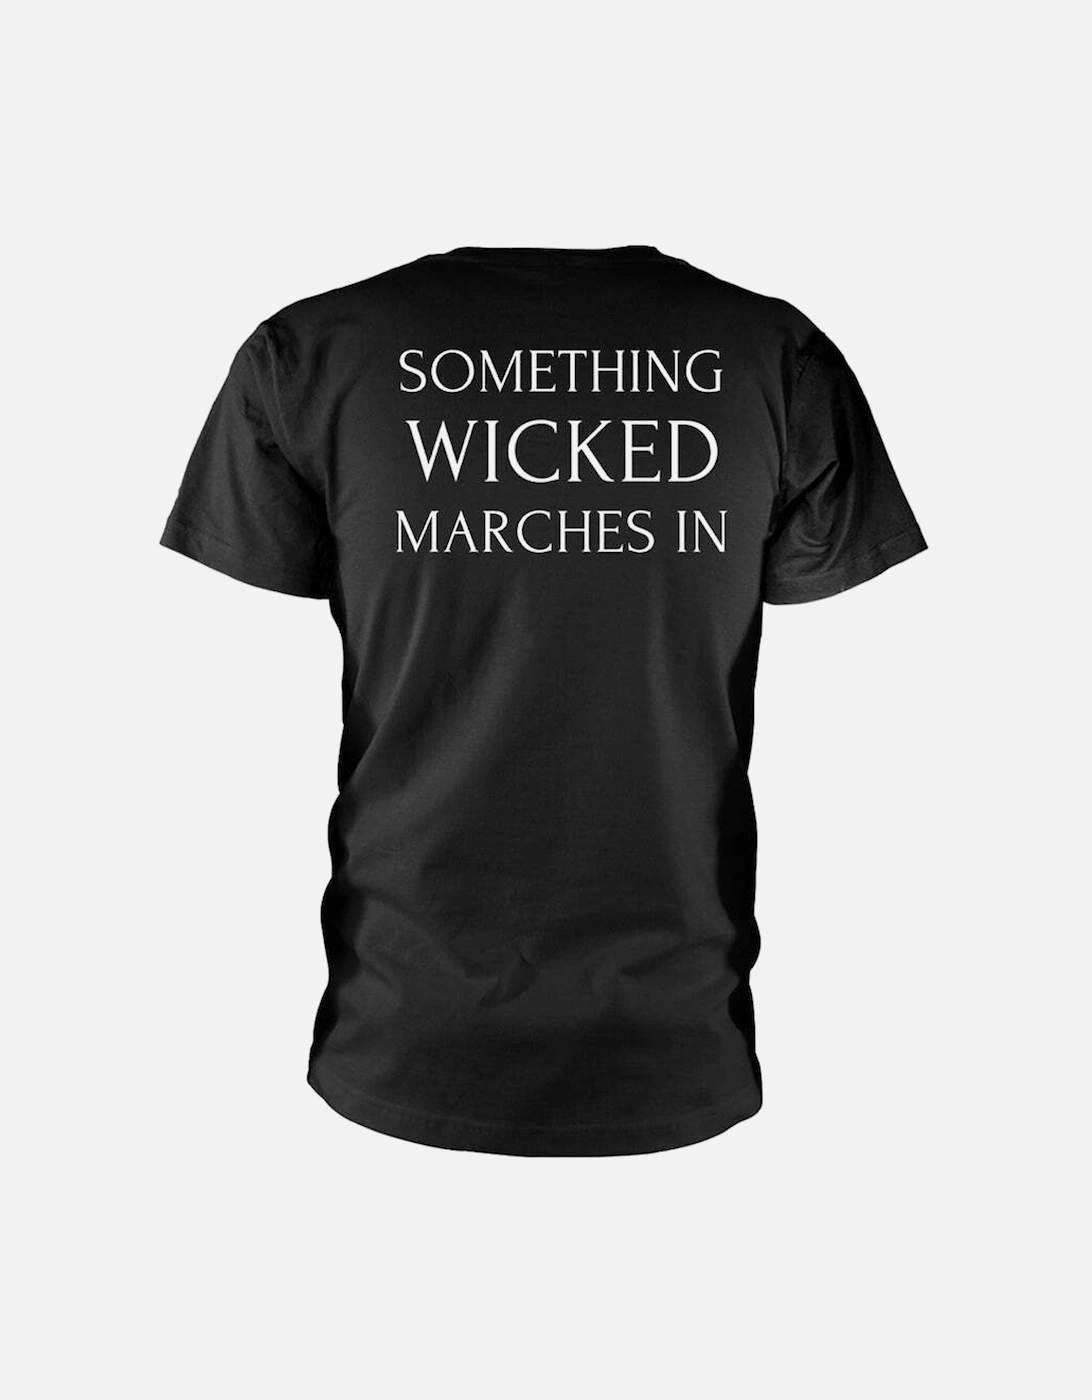 Unisex Adult Something Wicked Marches In T-Shirt